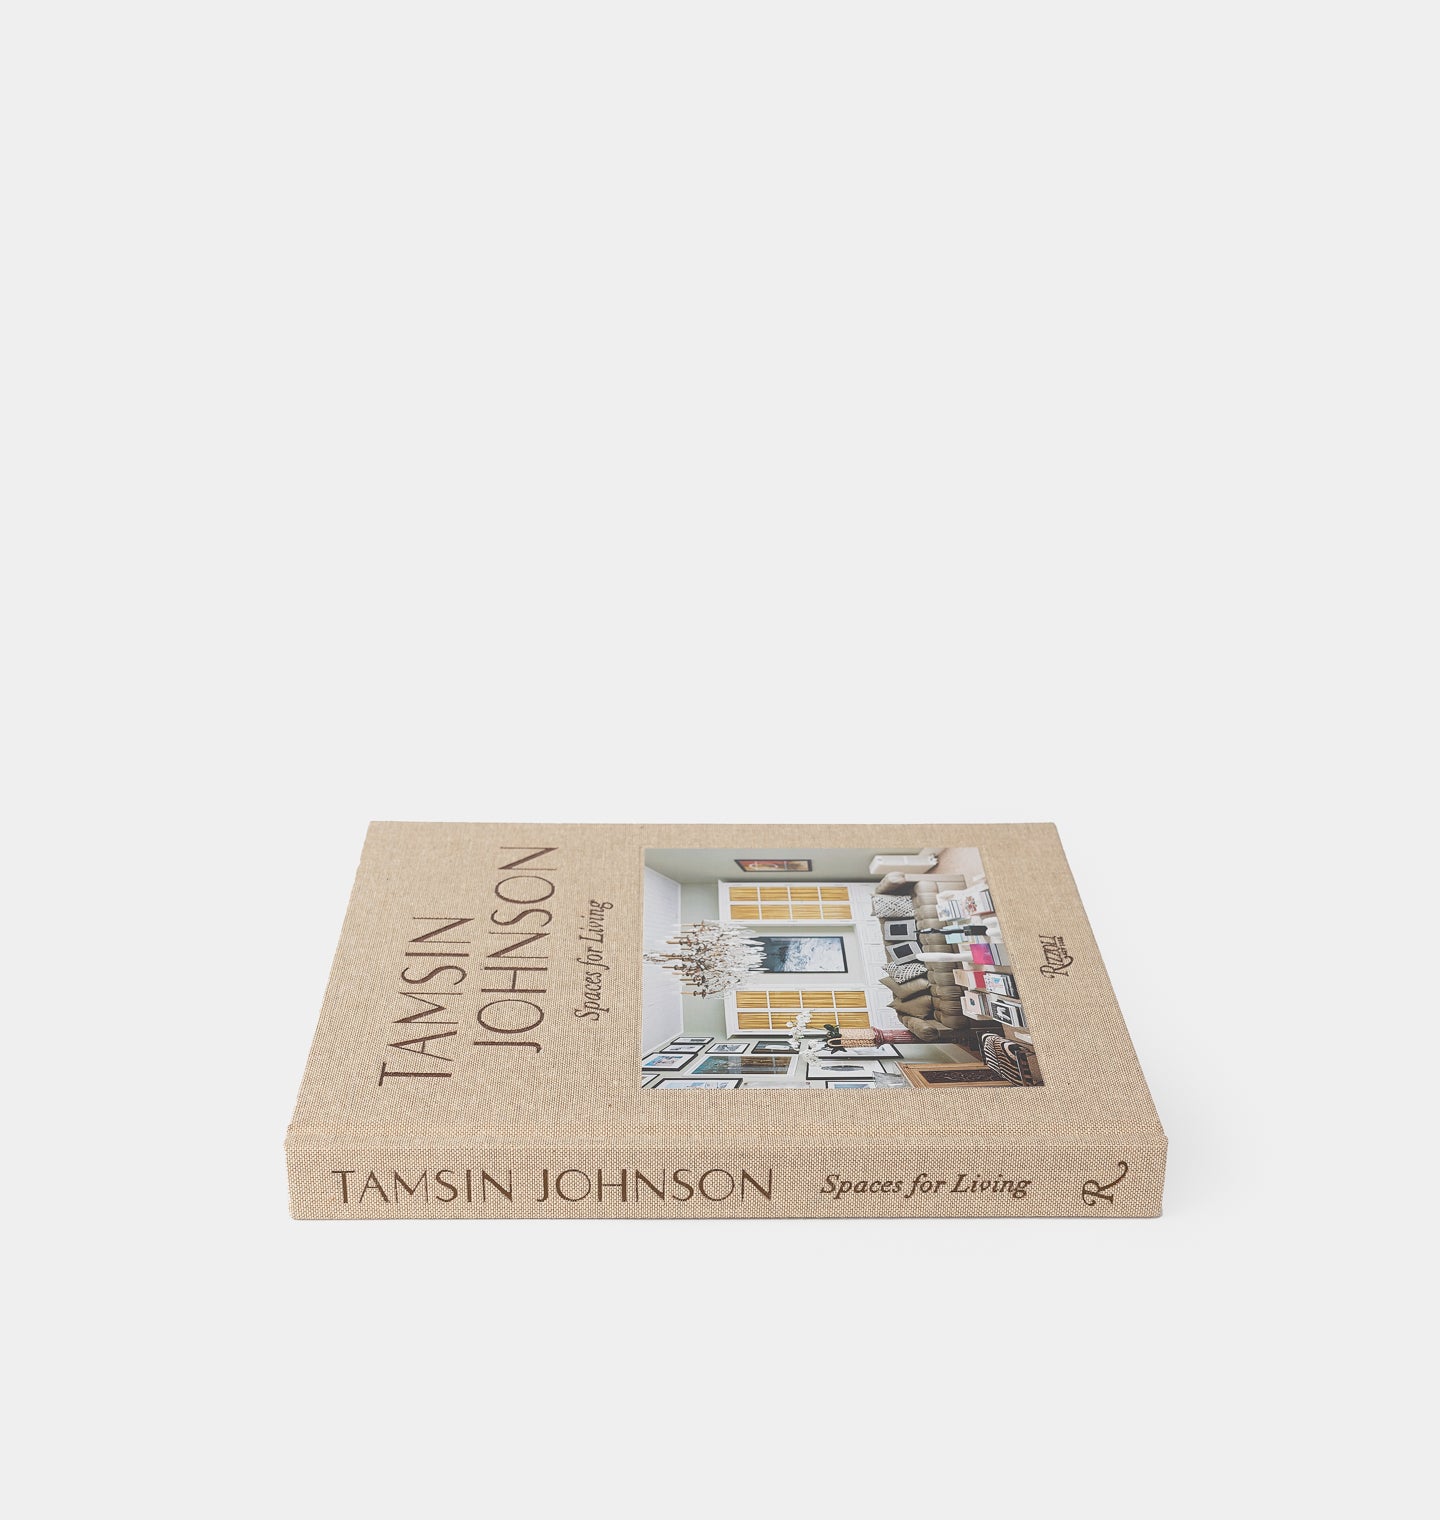 Tamsin Johnson: Spaces for Living